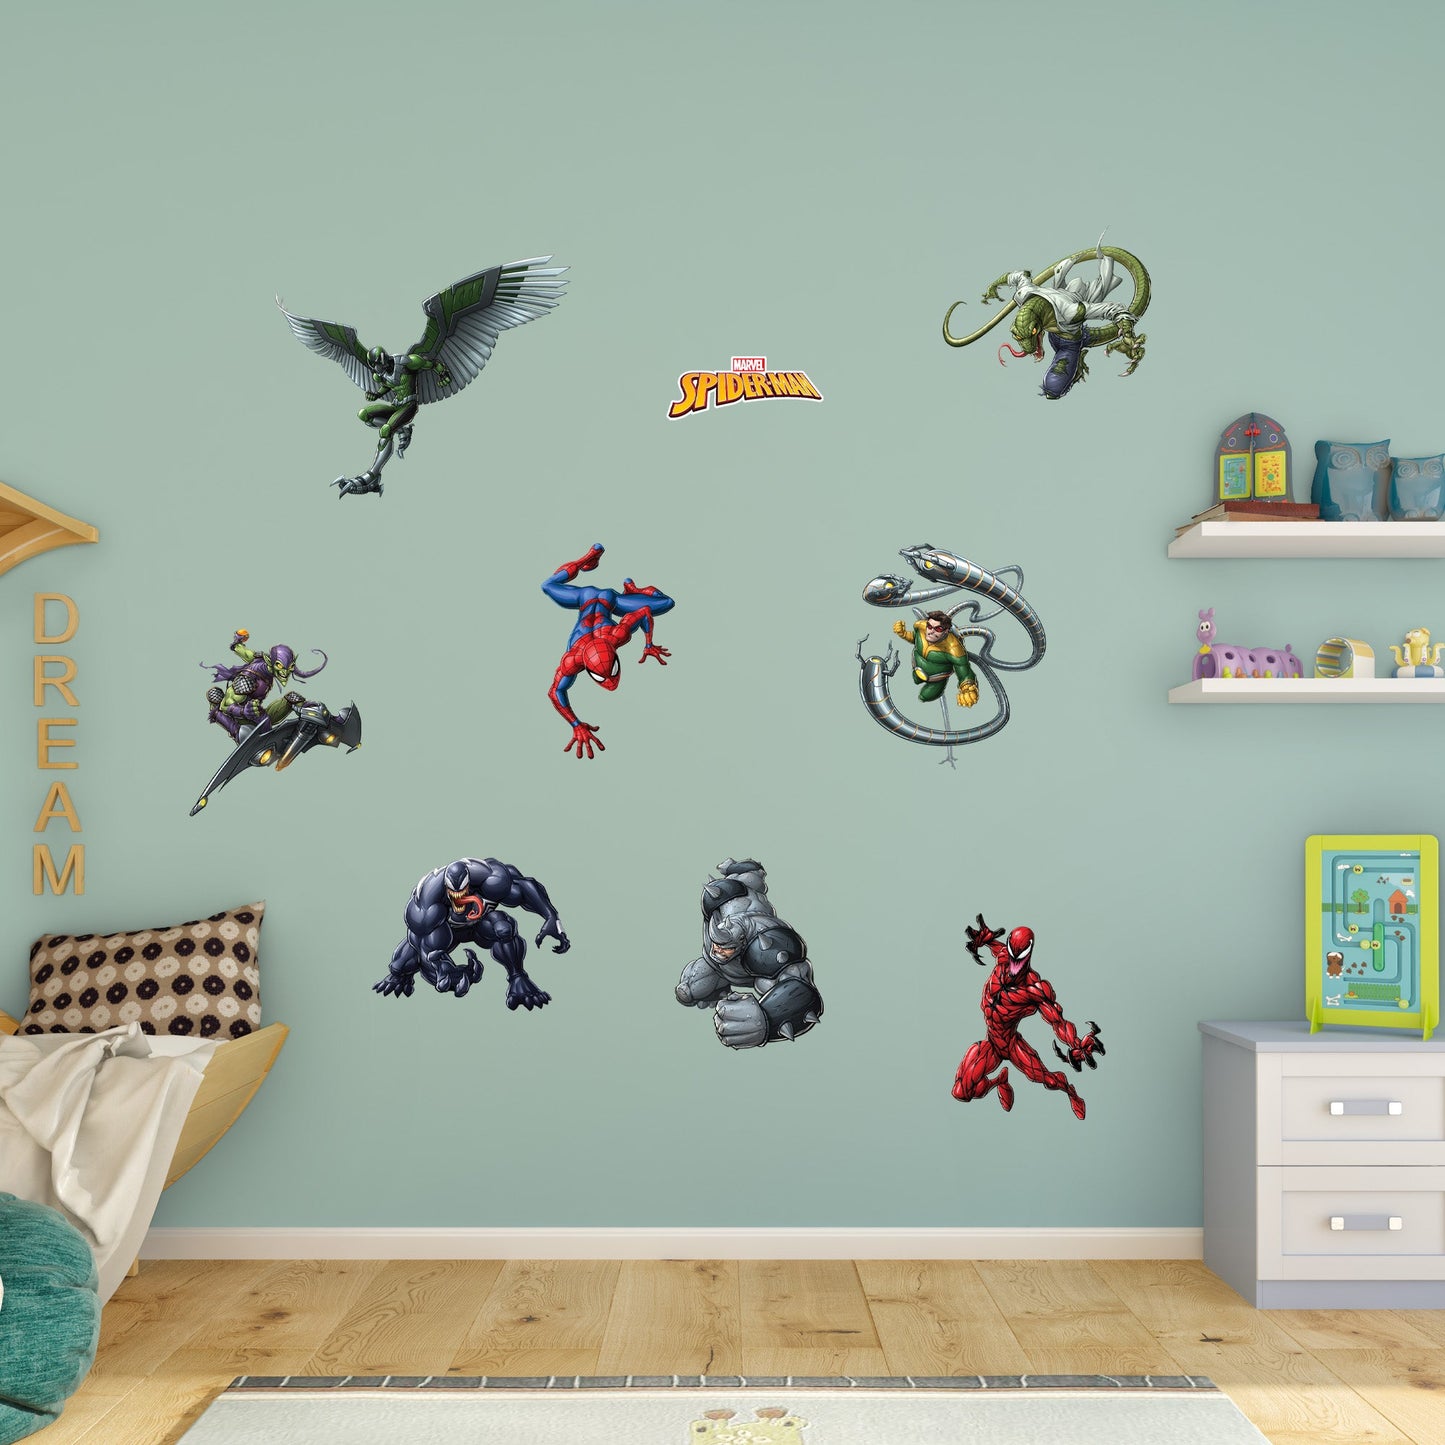 Spider-Man: Spider-Man Villains Collection        - Officially Licensed Marvel Removable     Adhesive Decal